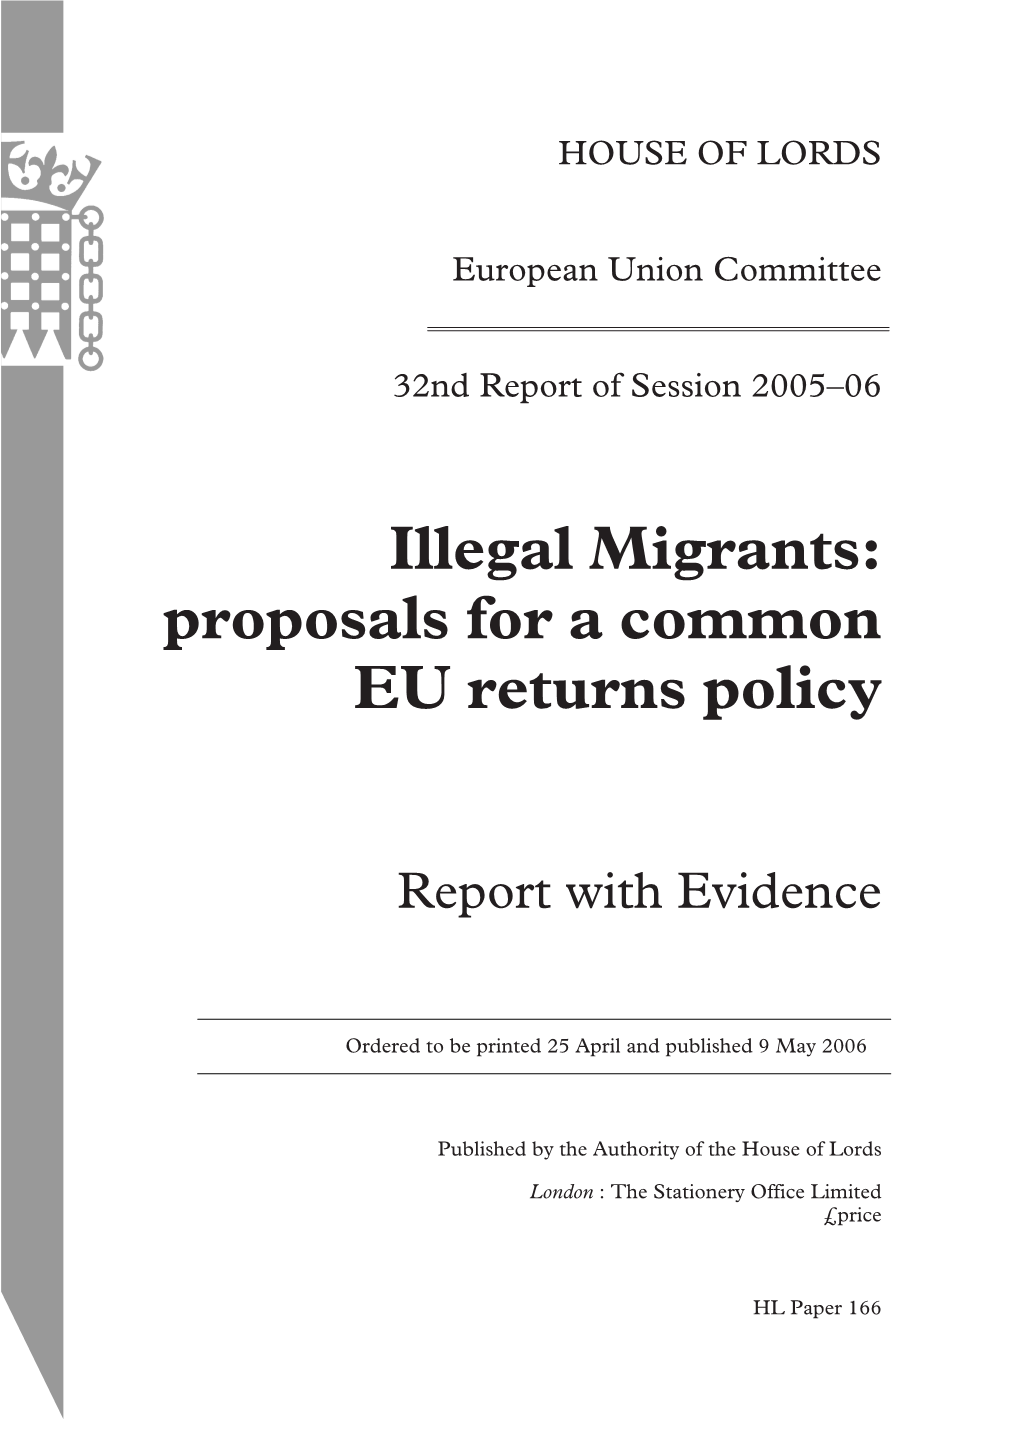 Illegal Migrants: Proposals for a Common EU Returns Policy